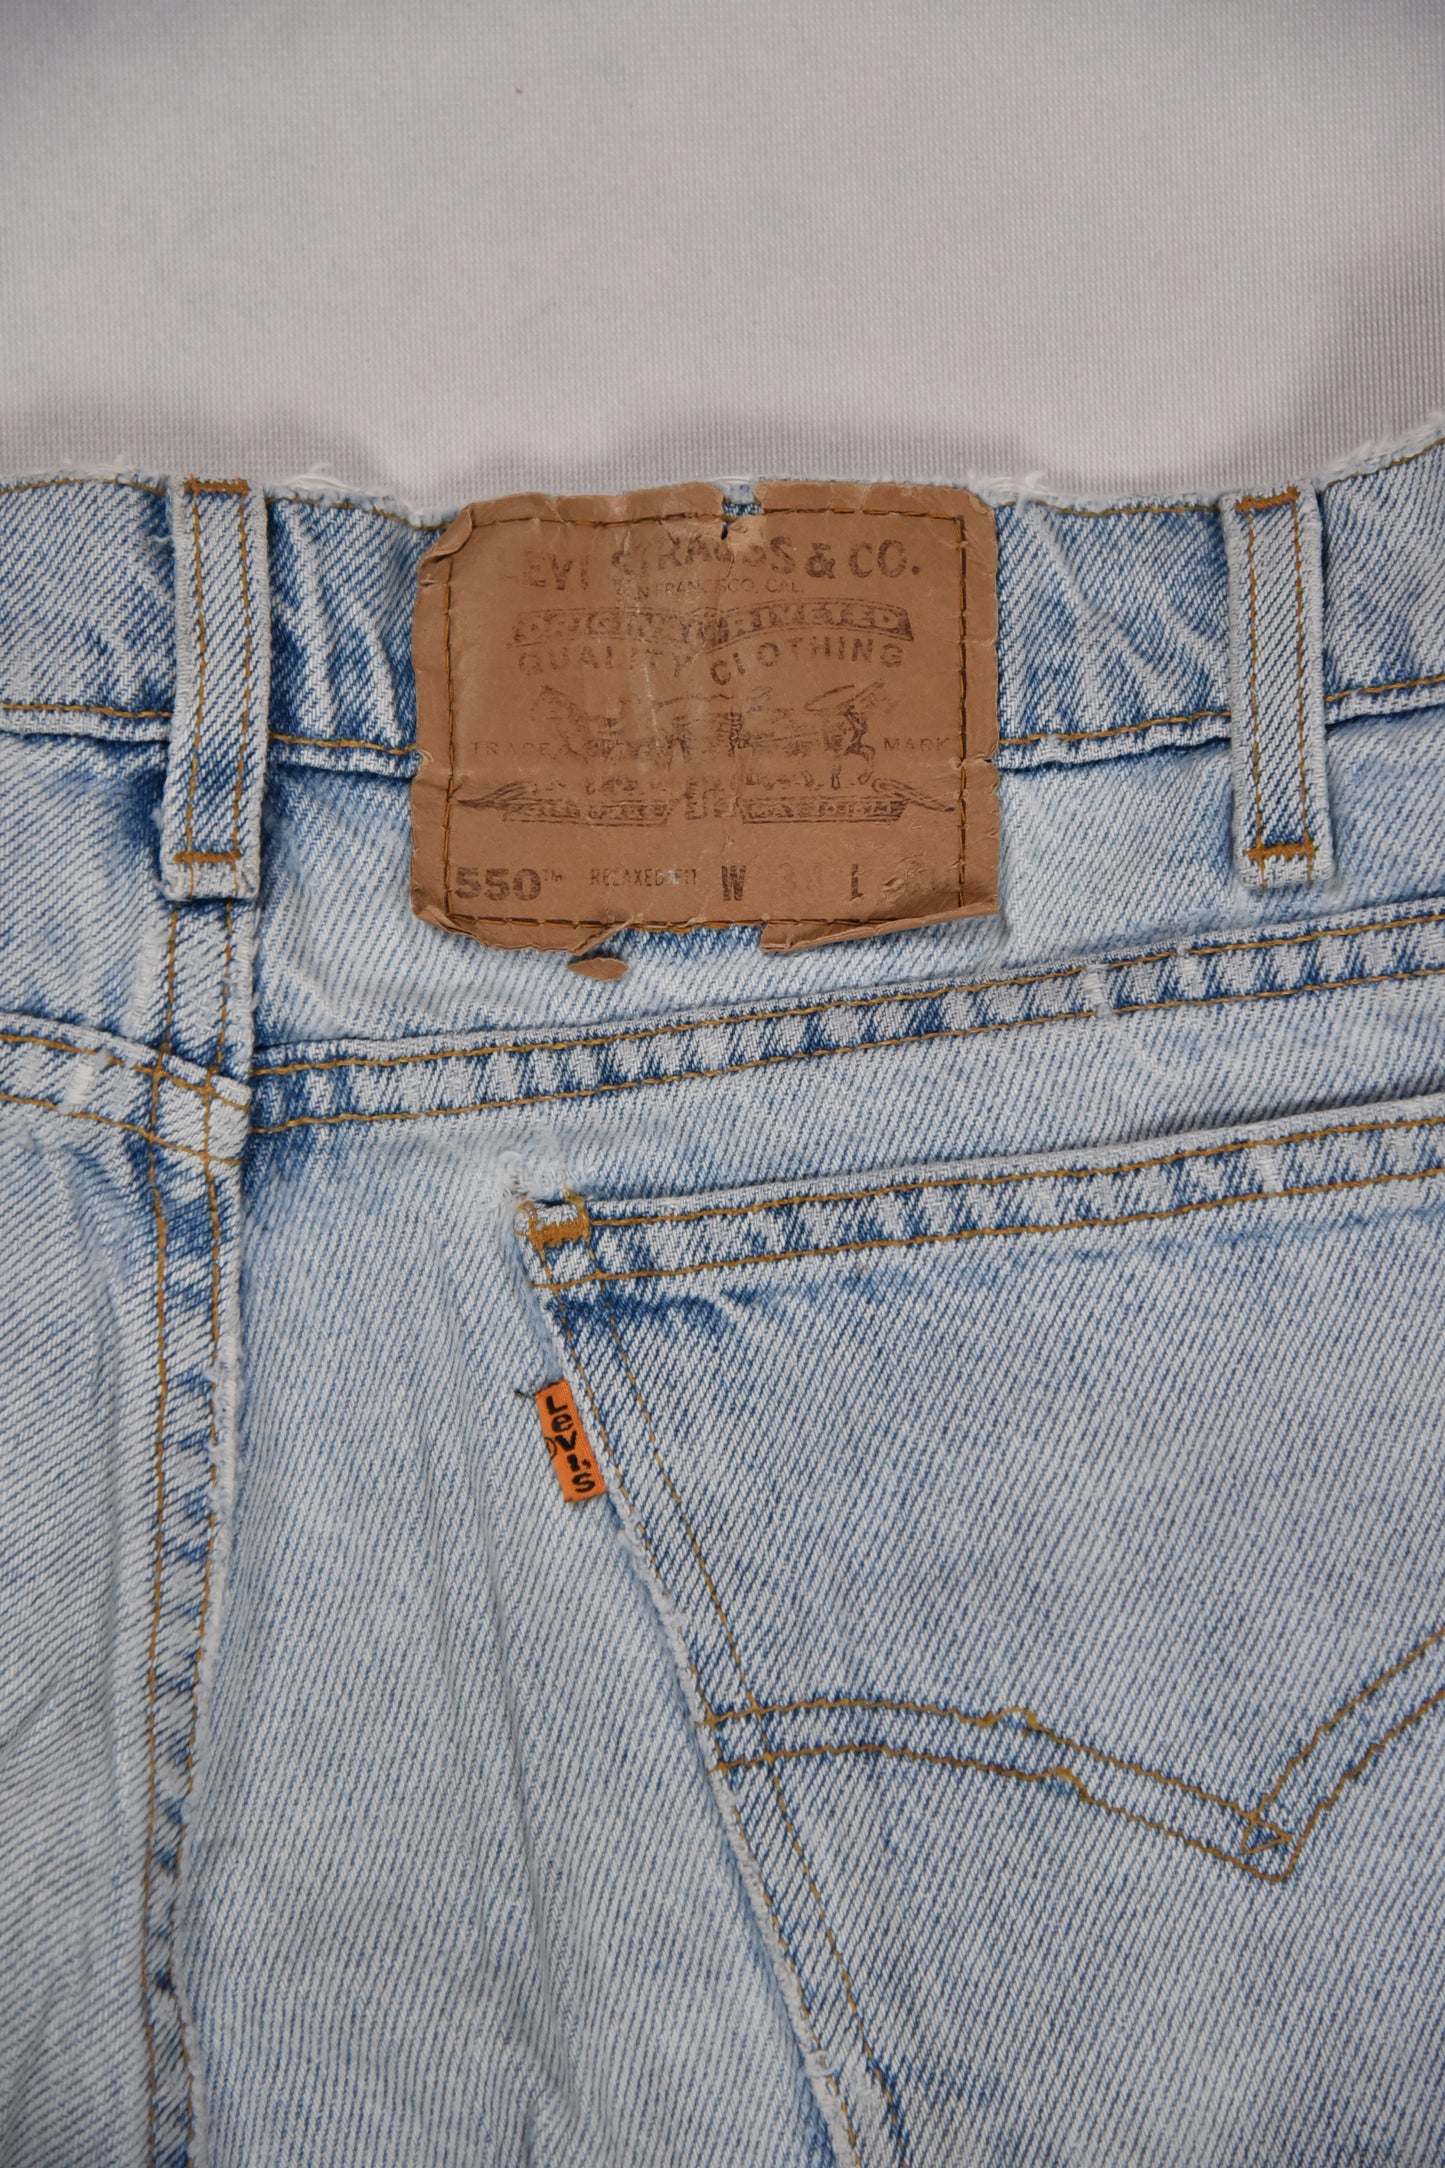 Jeans Levi's 550 Orange Tab Cropped Made in USA Vintage / 34